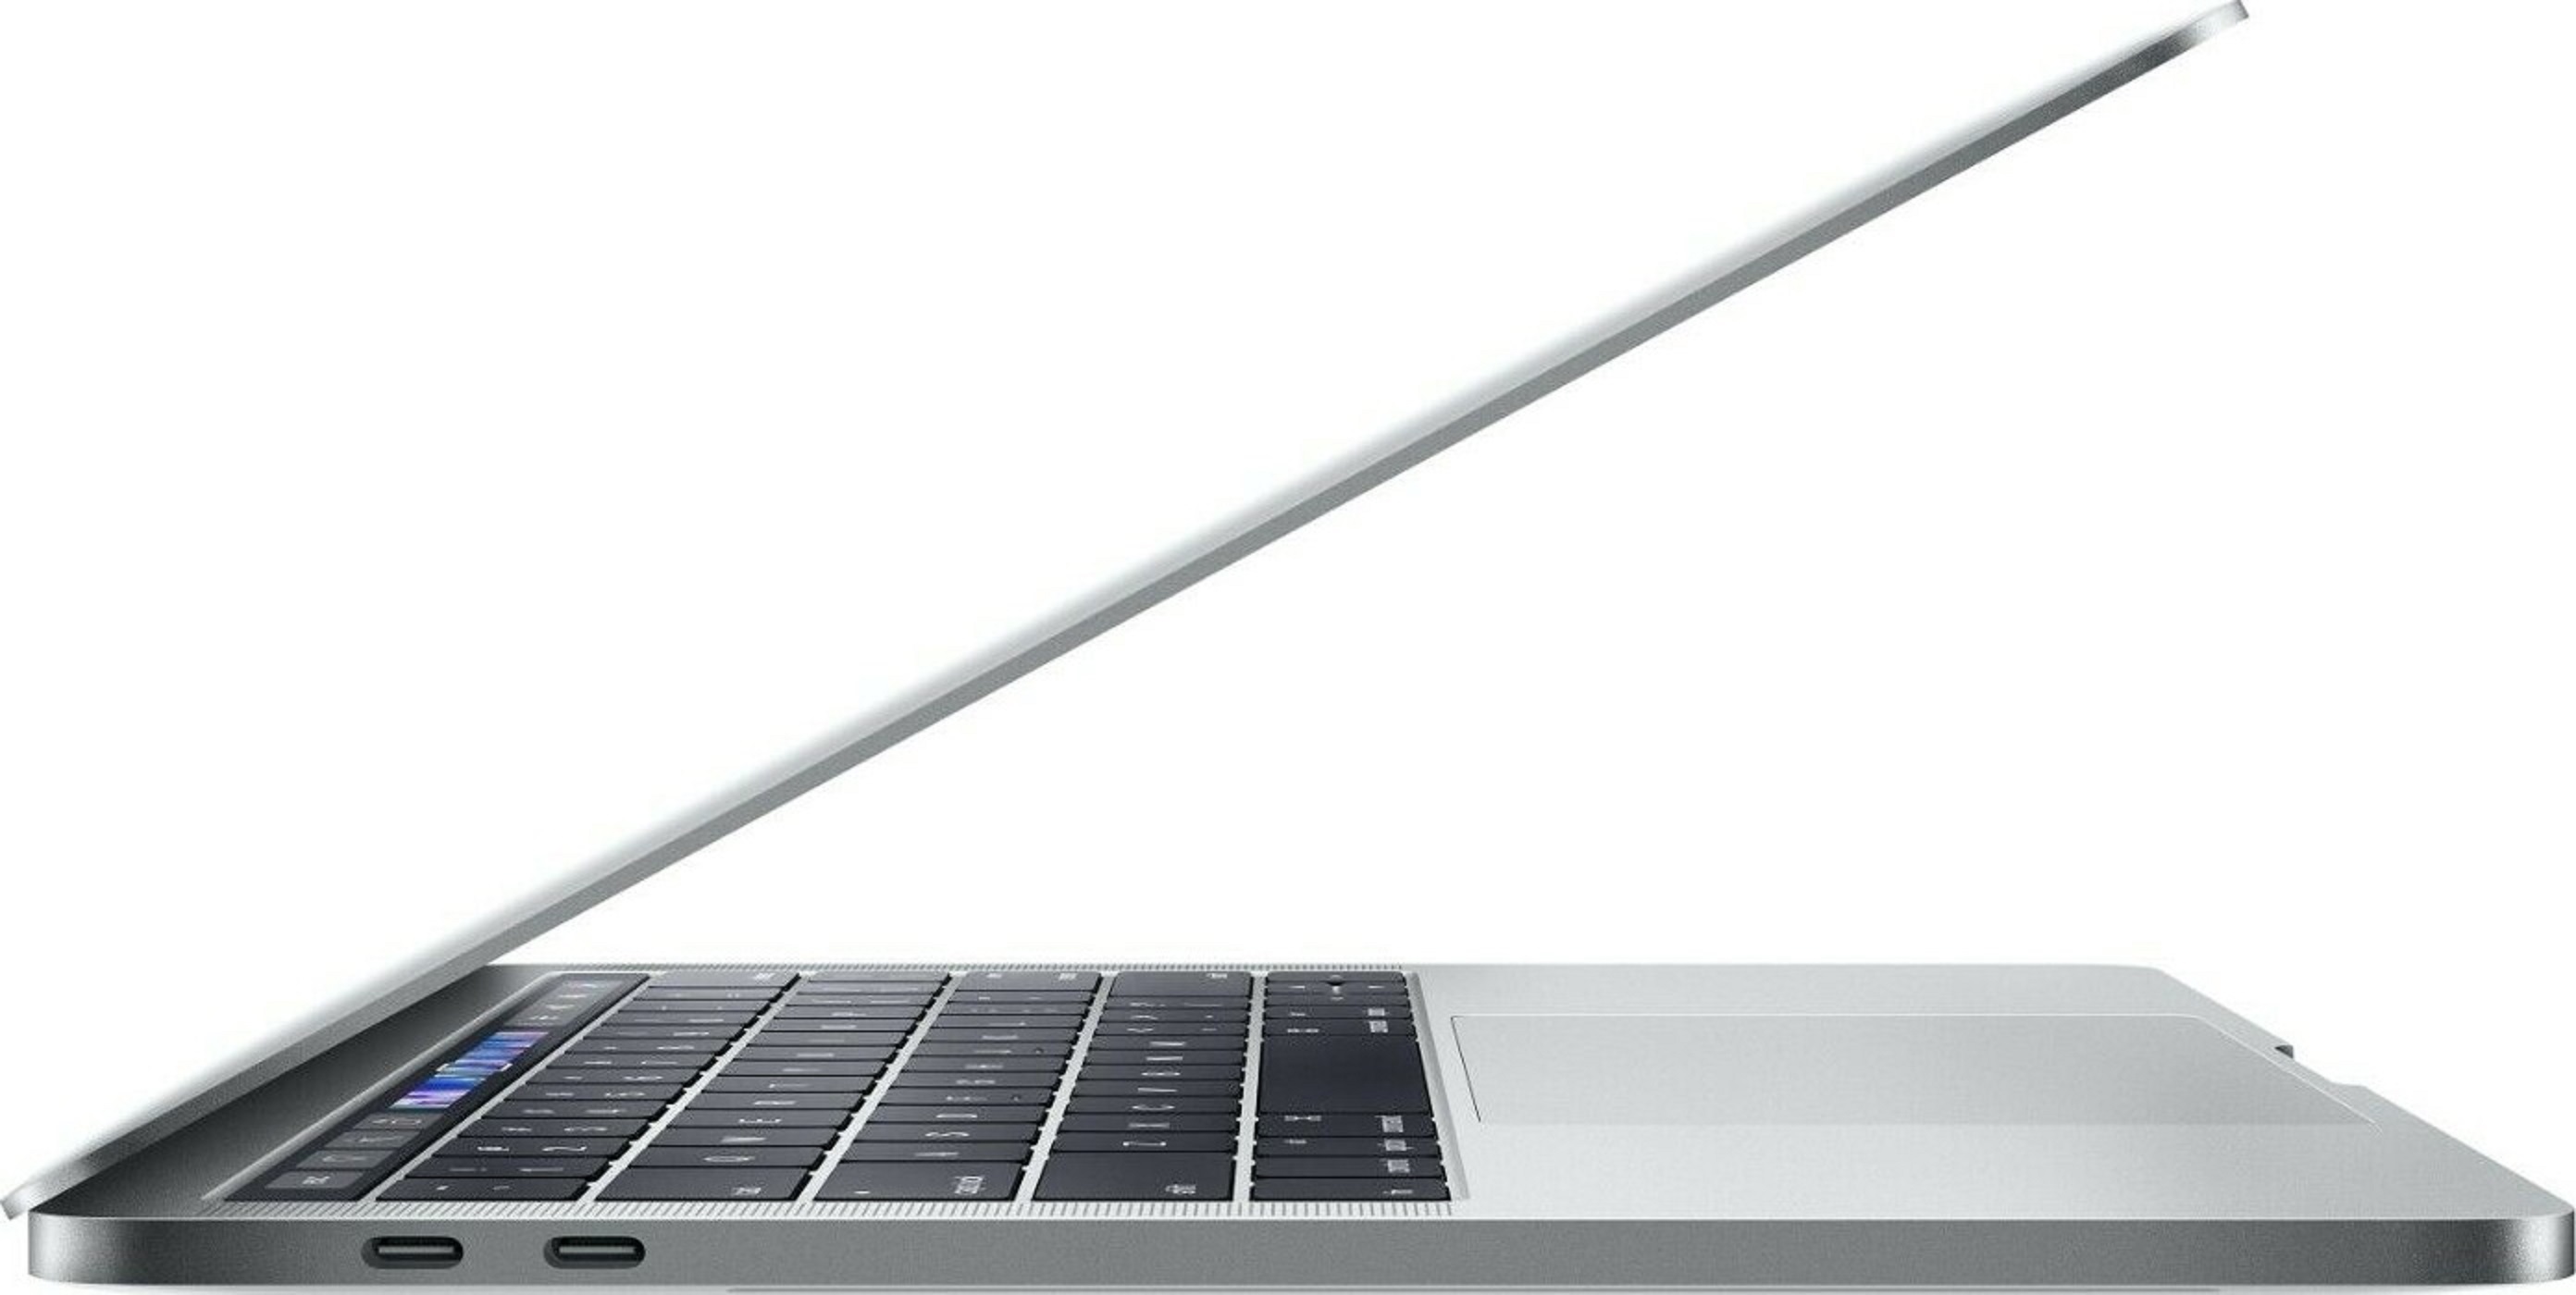 MACBOOK PRO 2019 13inch A2159 ジャンク - PC/タブレット